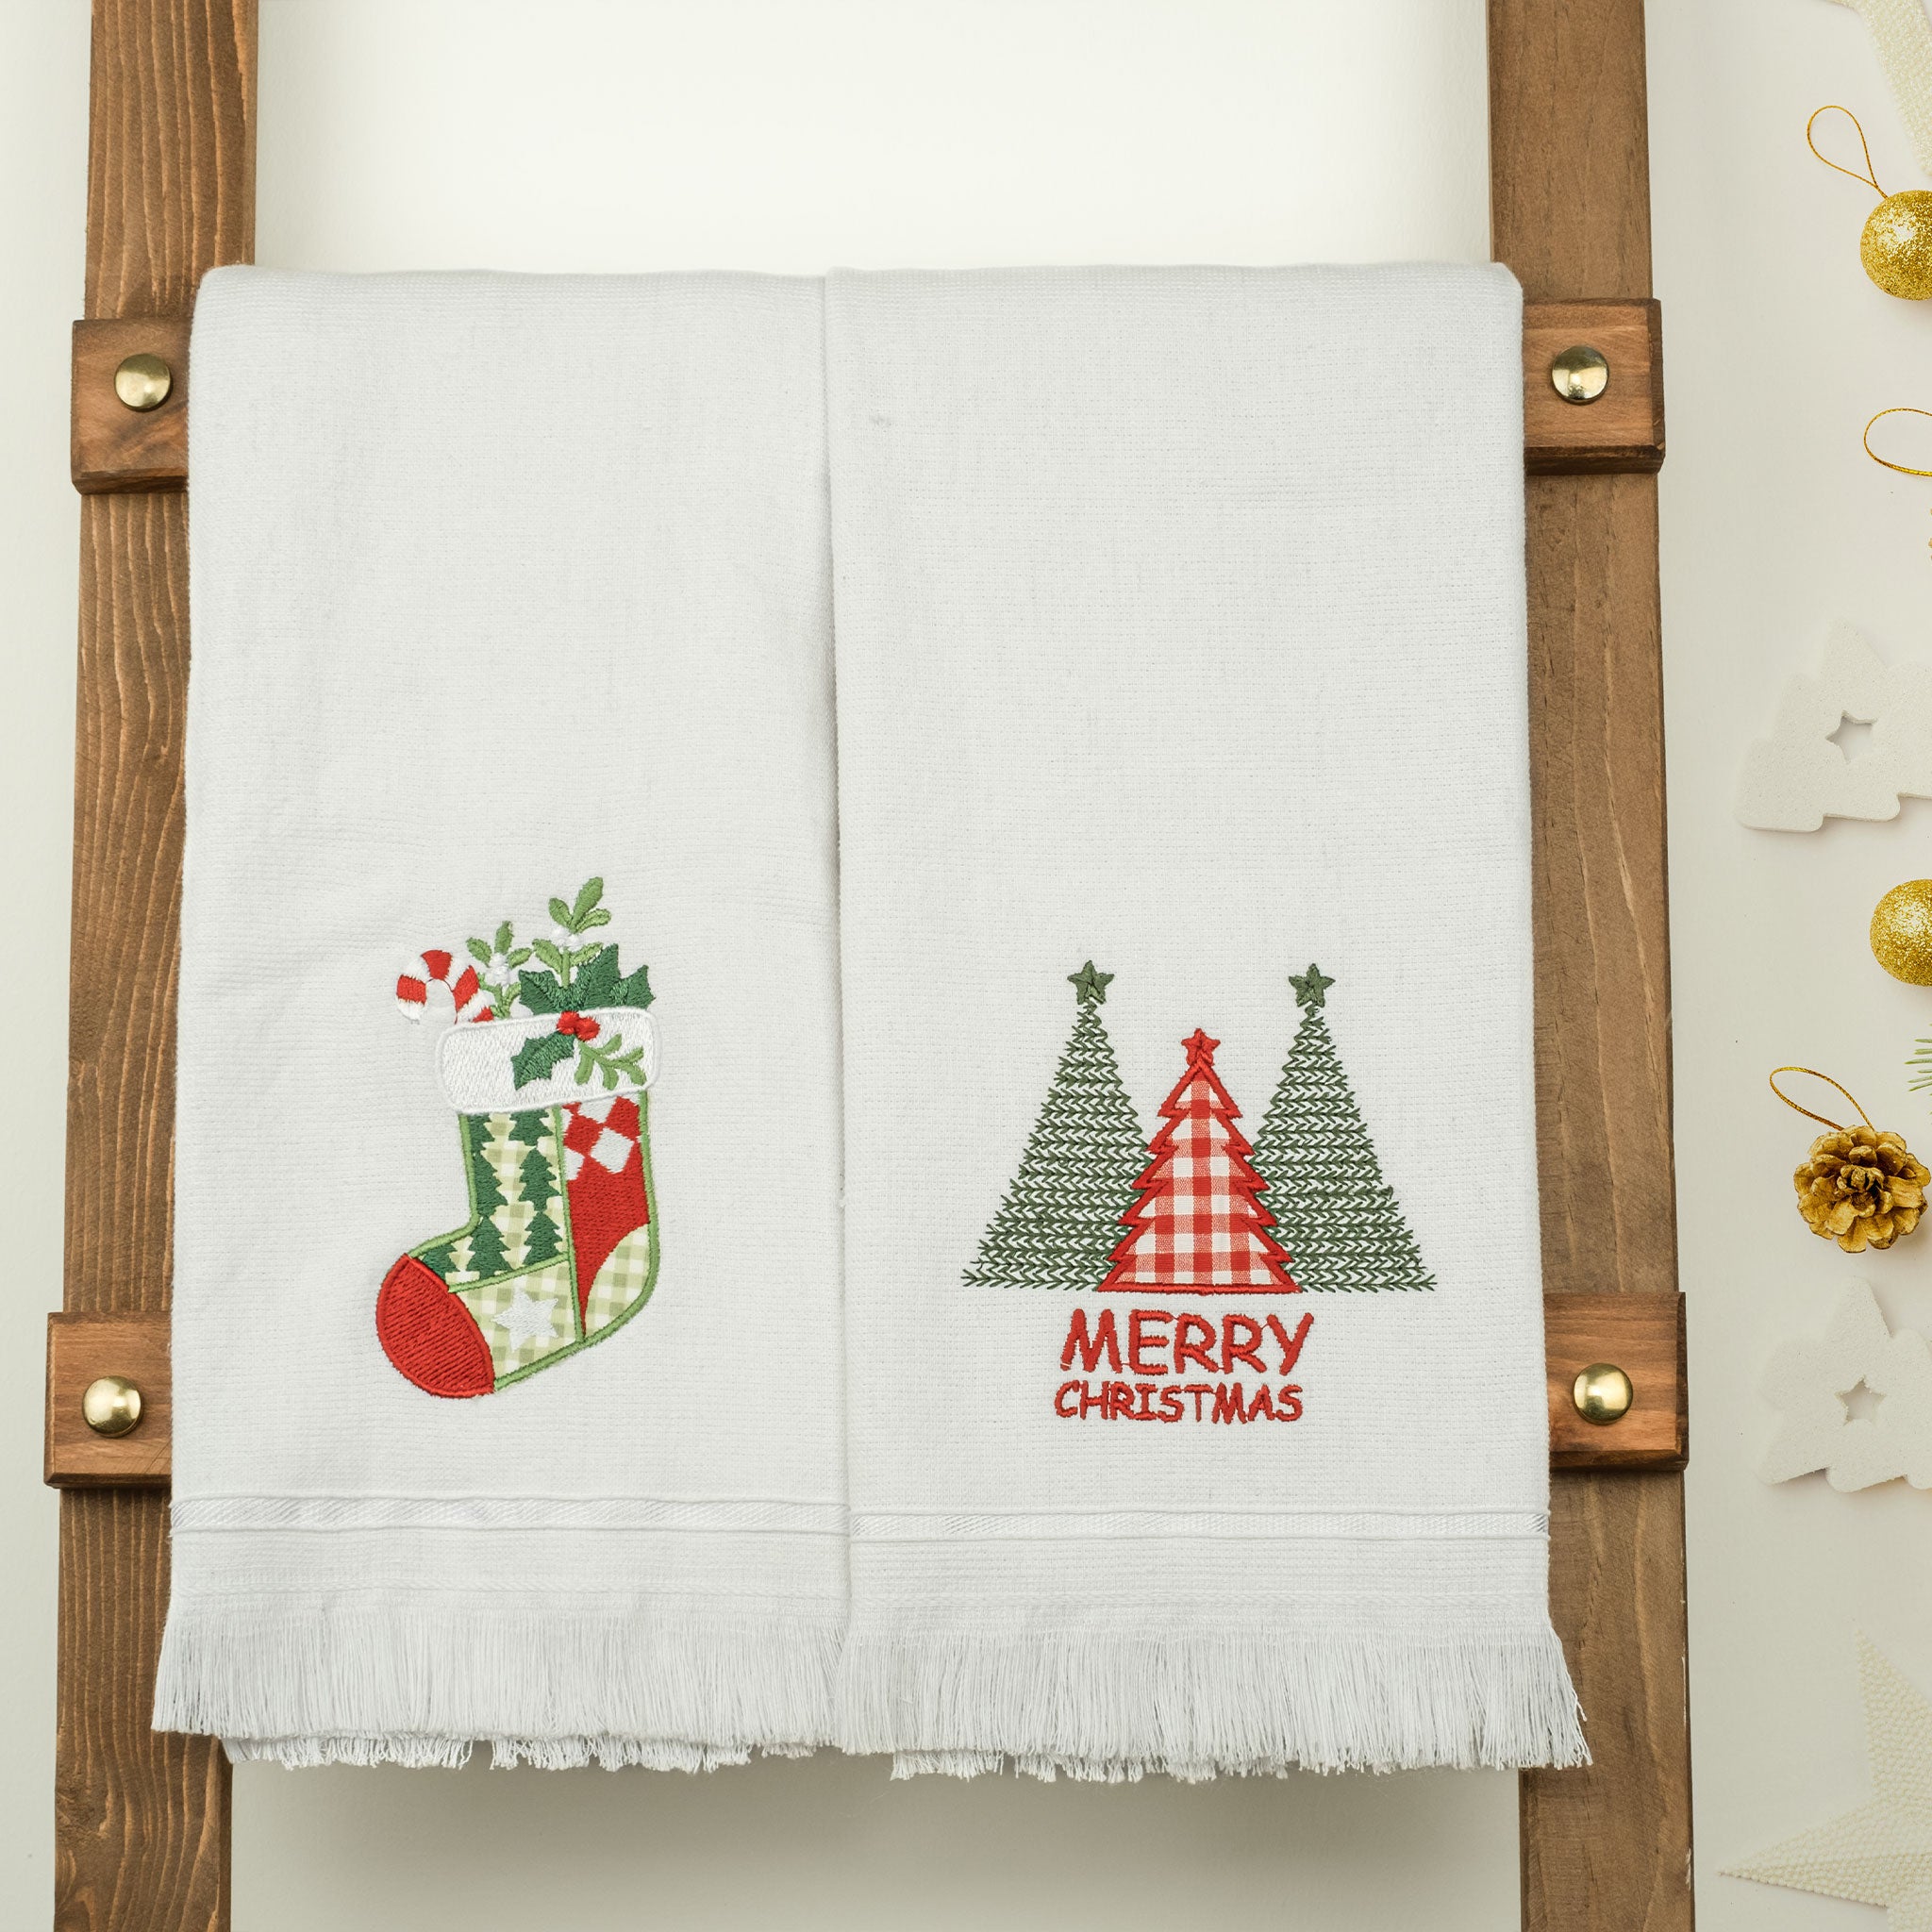  American Soft Linen - Christmas Towels Set 2 Packed Embroidered Turkish Cotton Hand Towels - Christmas Tree Socks - 5